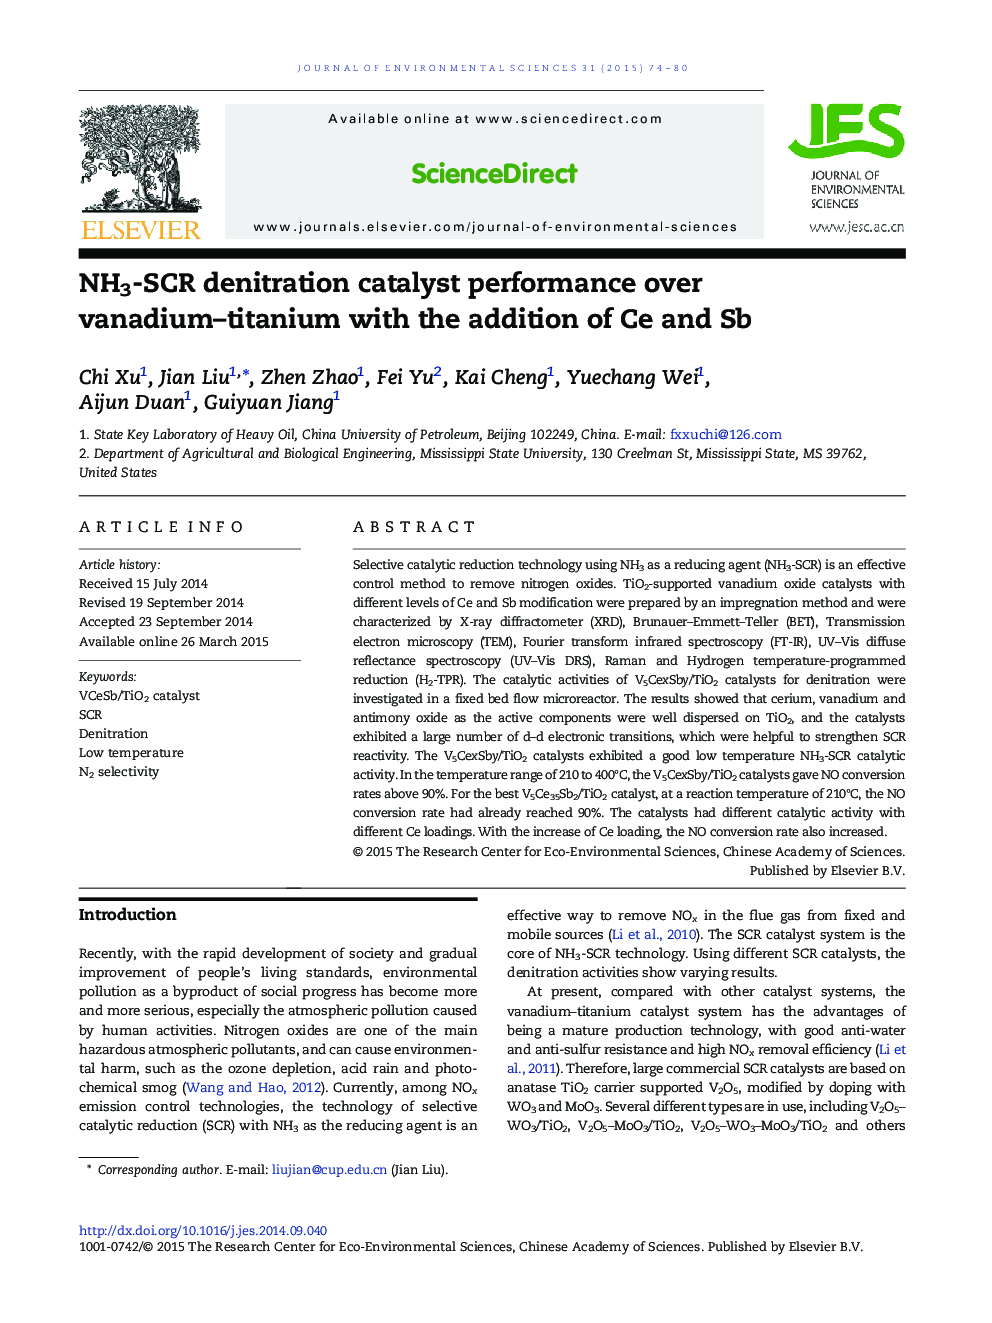 NH3-SCR denitration catalyst performance over vanadium–titanium with the addition of Ce and Sb